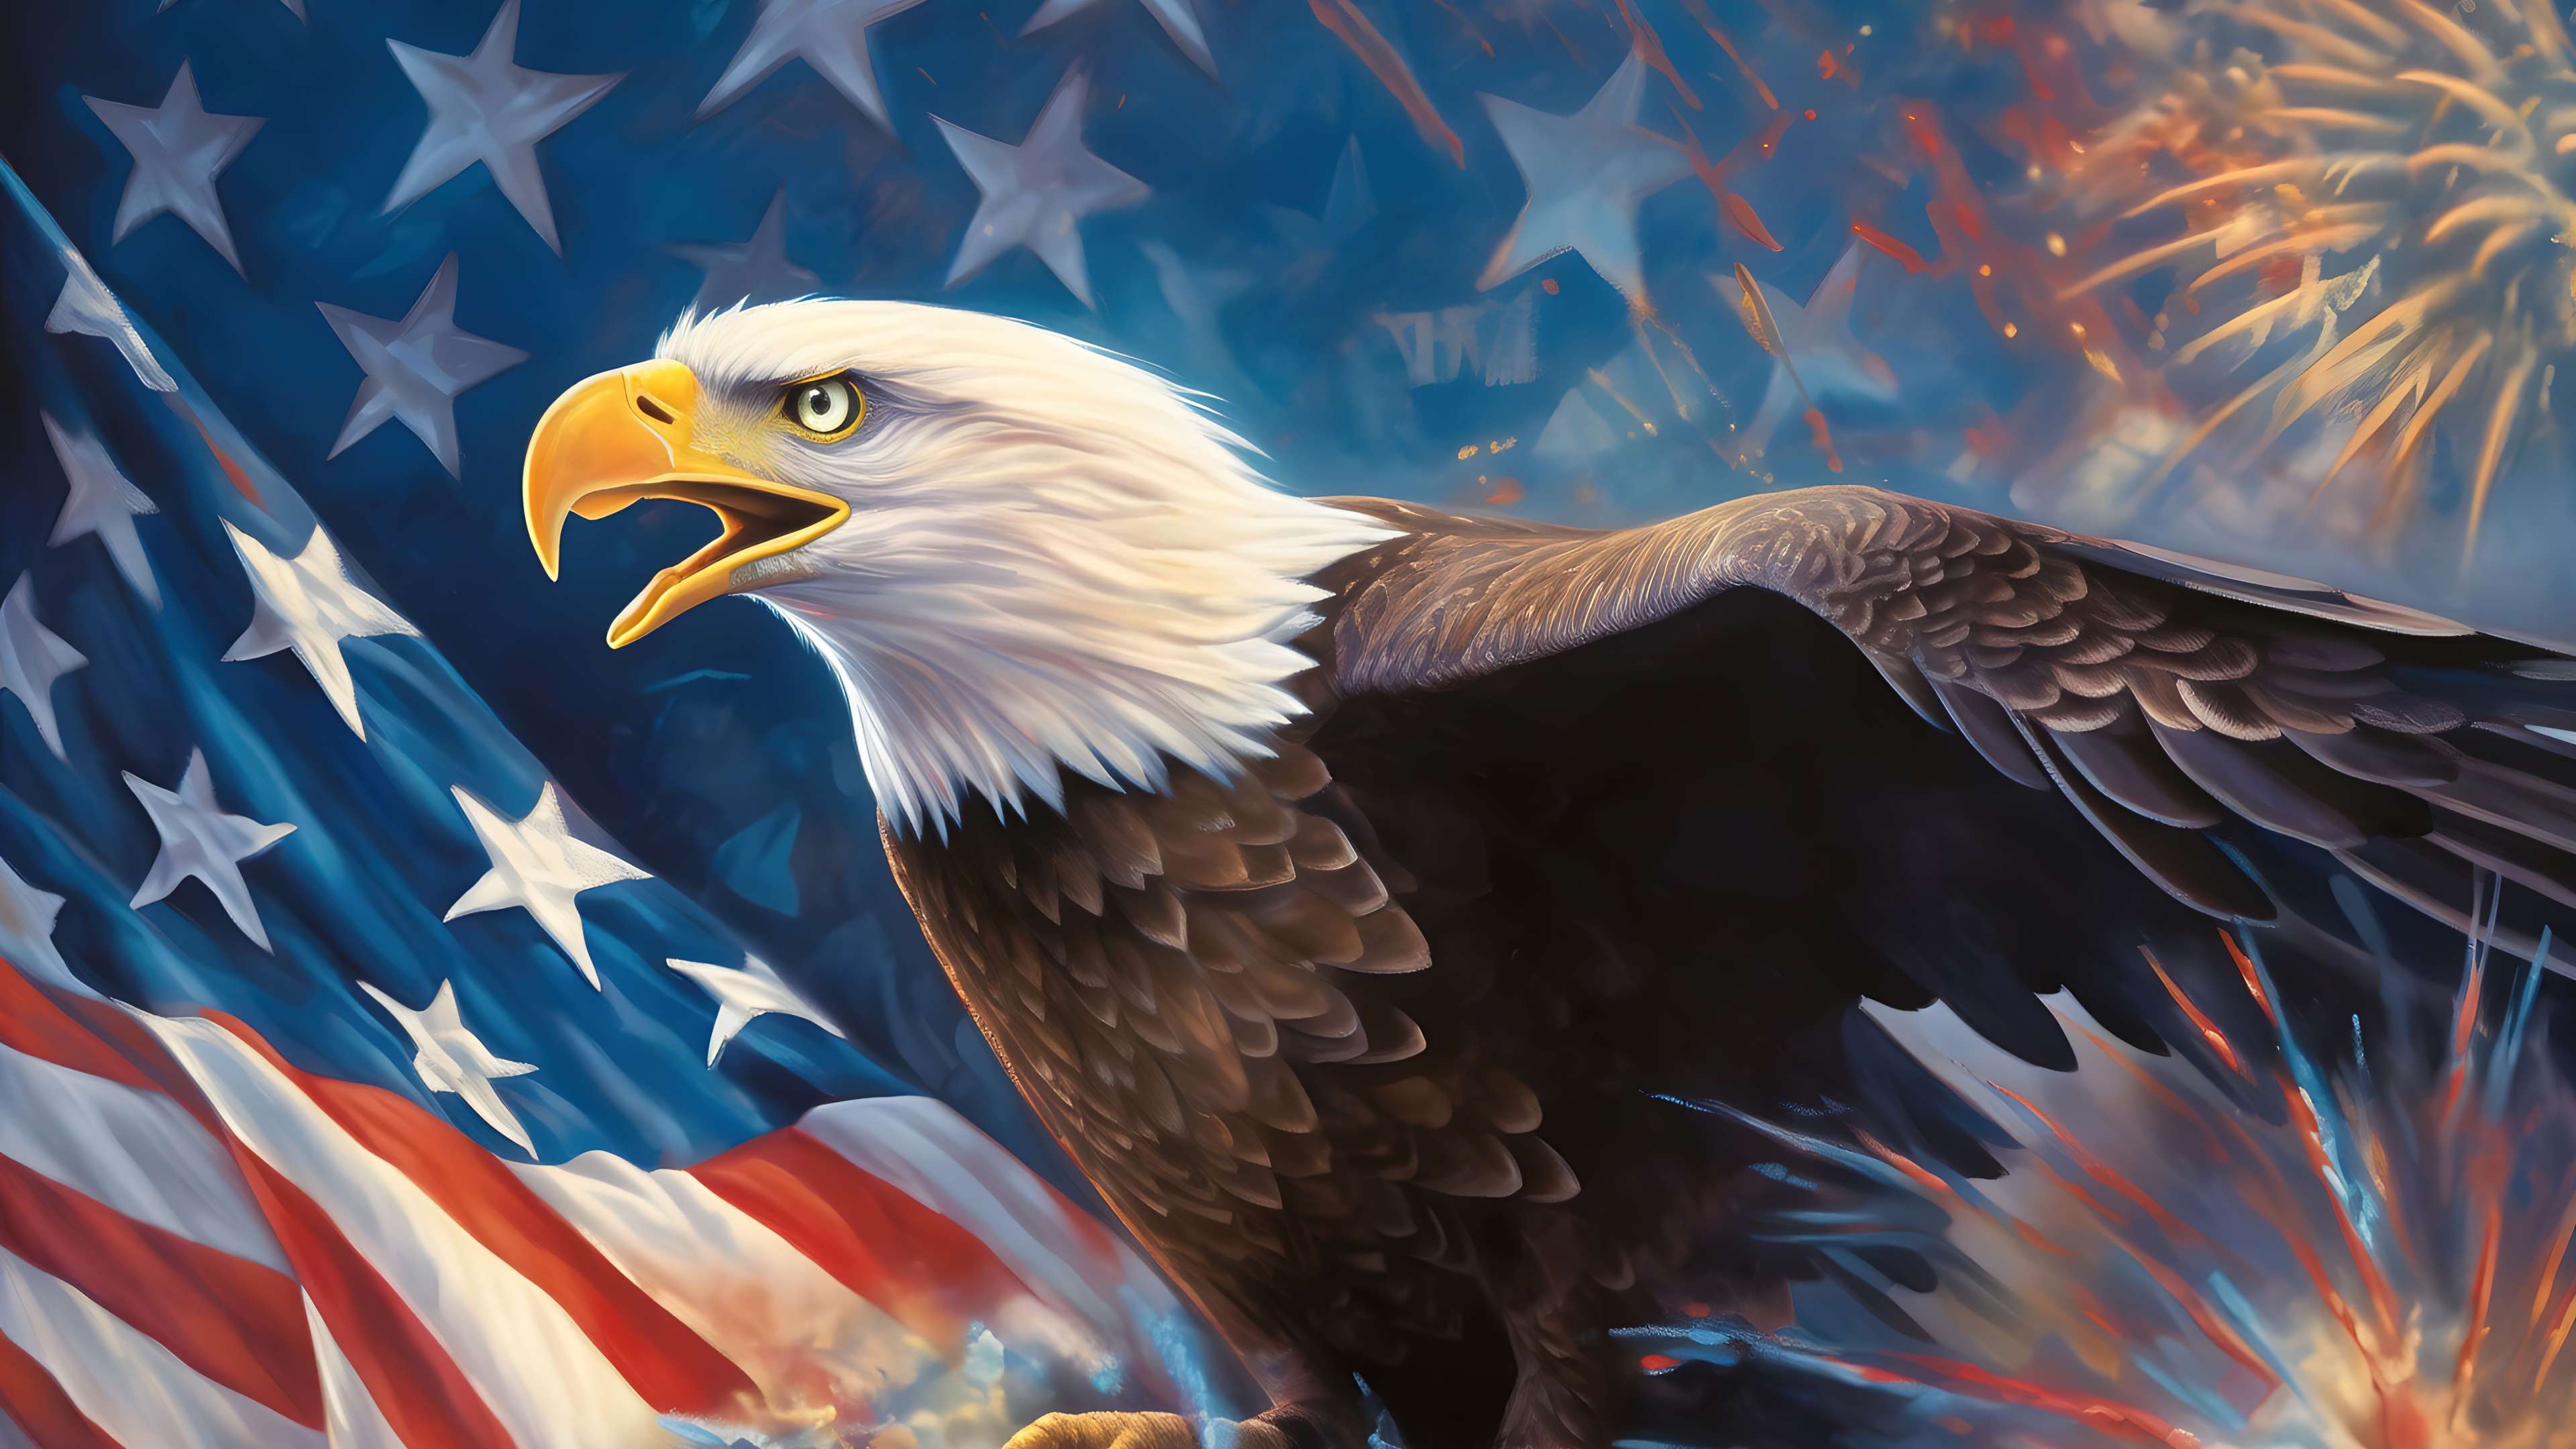 Bald eagle Wallpaper 4K Independence Day 4th of July 11886